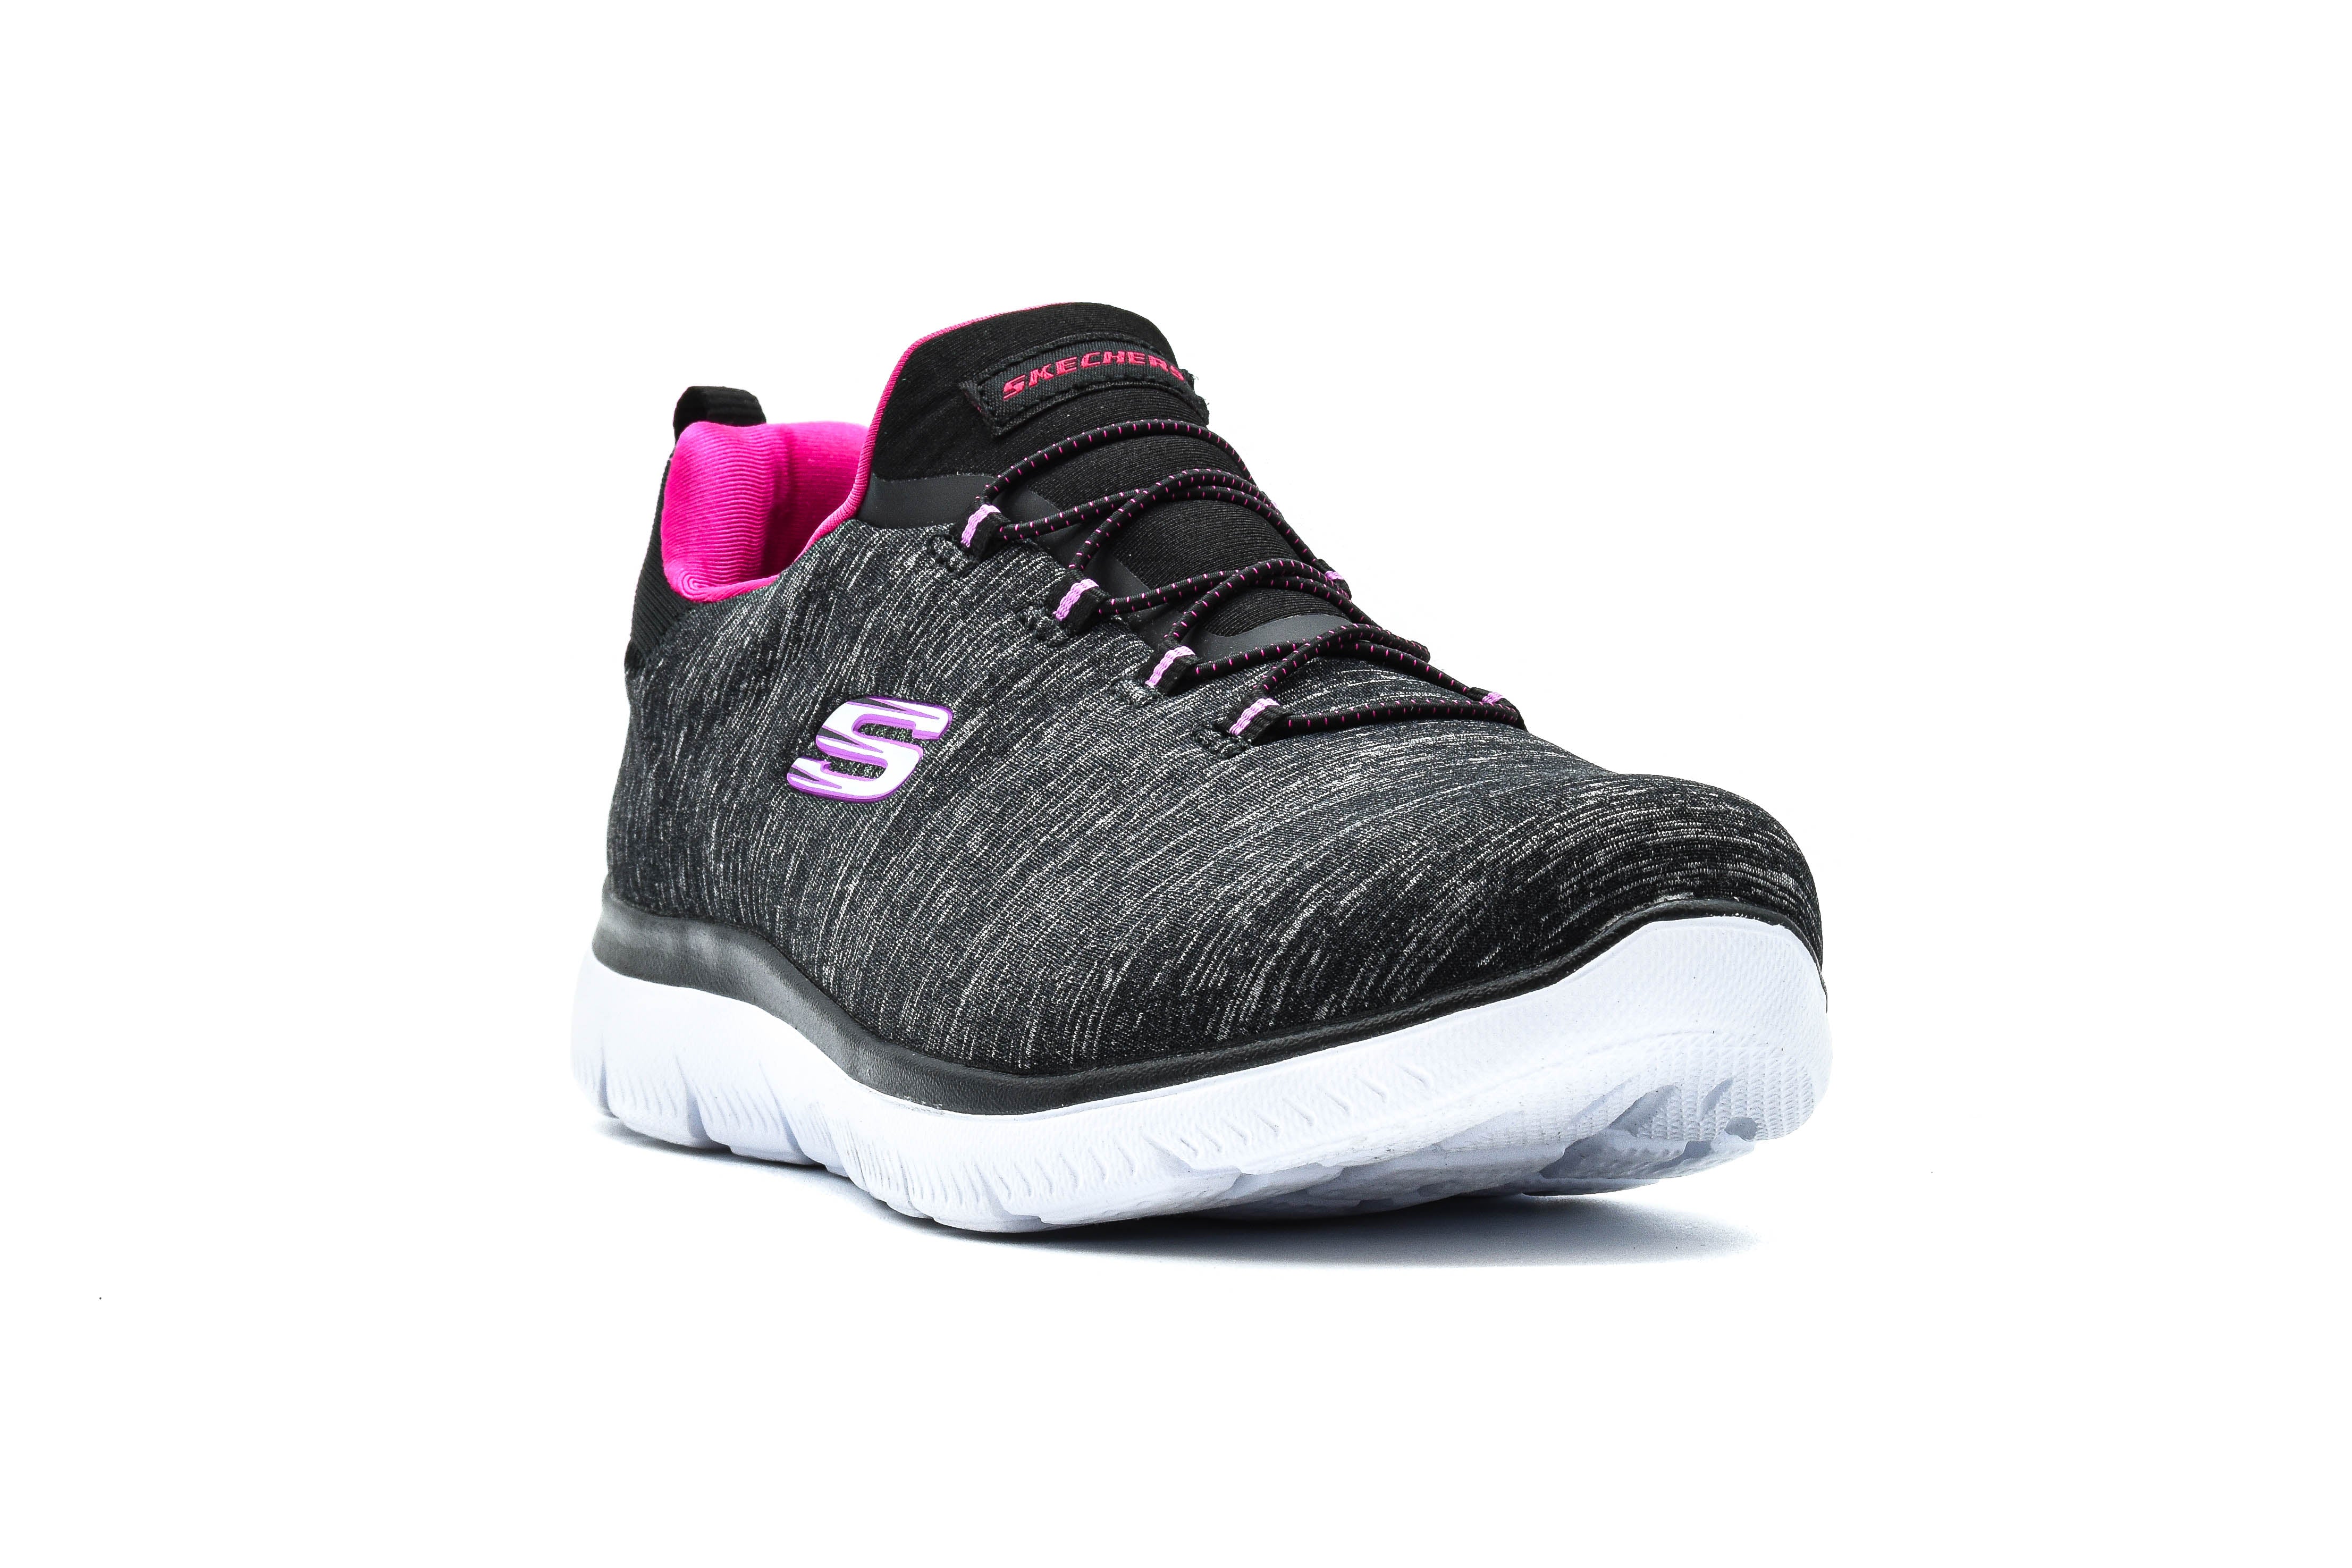 Skechers L.A. Gear Retro Pink and White High Top Sneakers Size 10 - $49  (42% Off Retail) - From Lauren